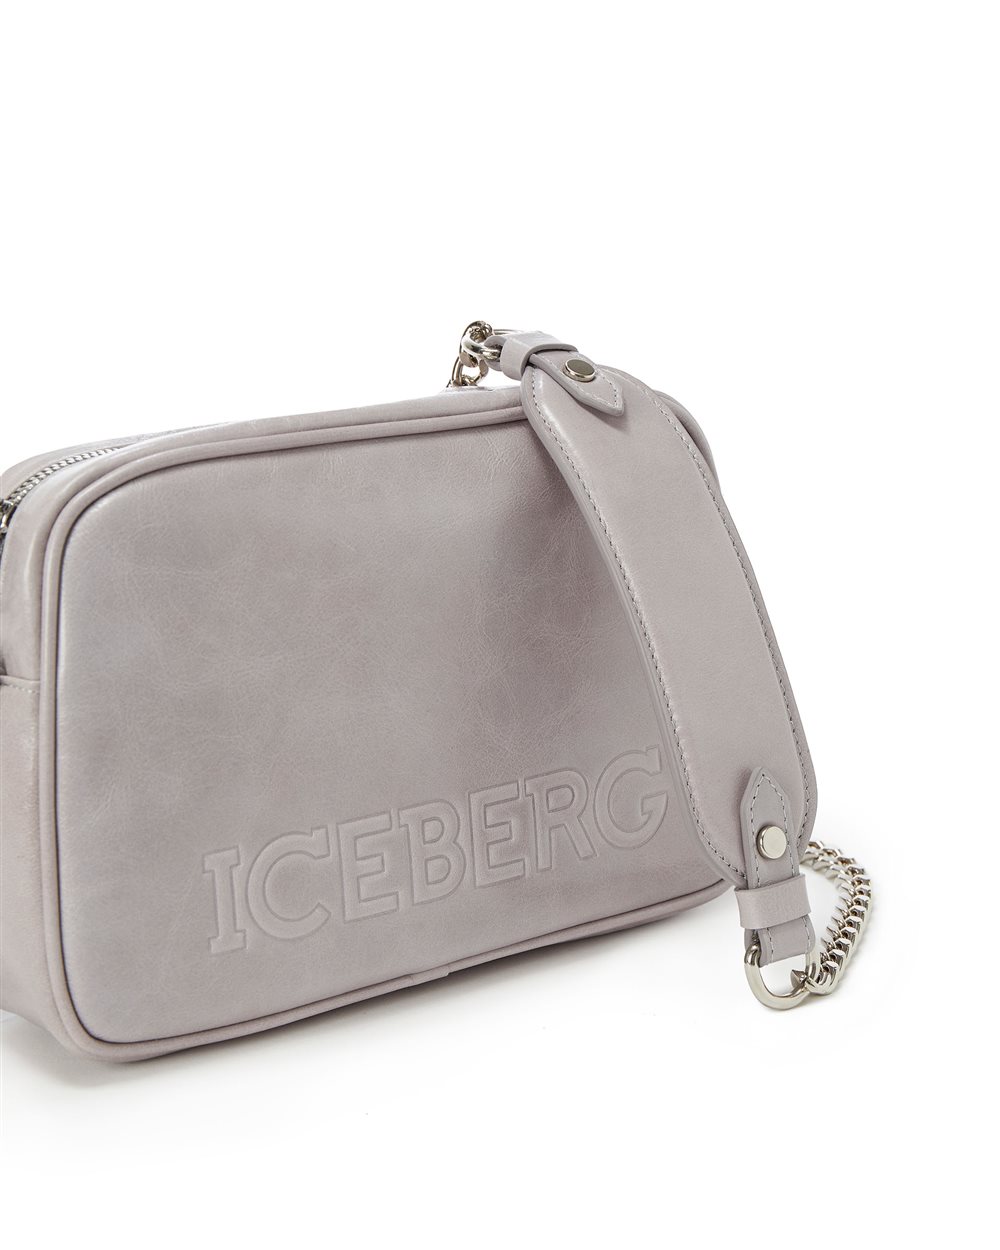 Leather clutch bag with logo - Iceberg - Official Website